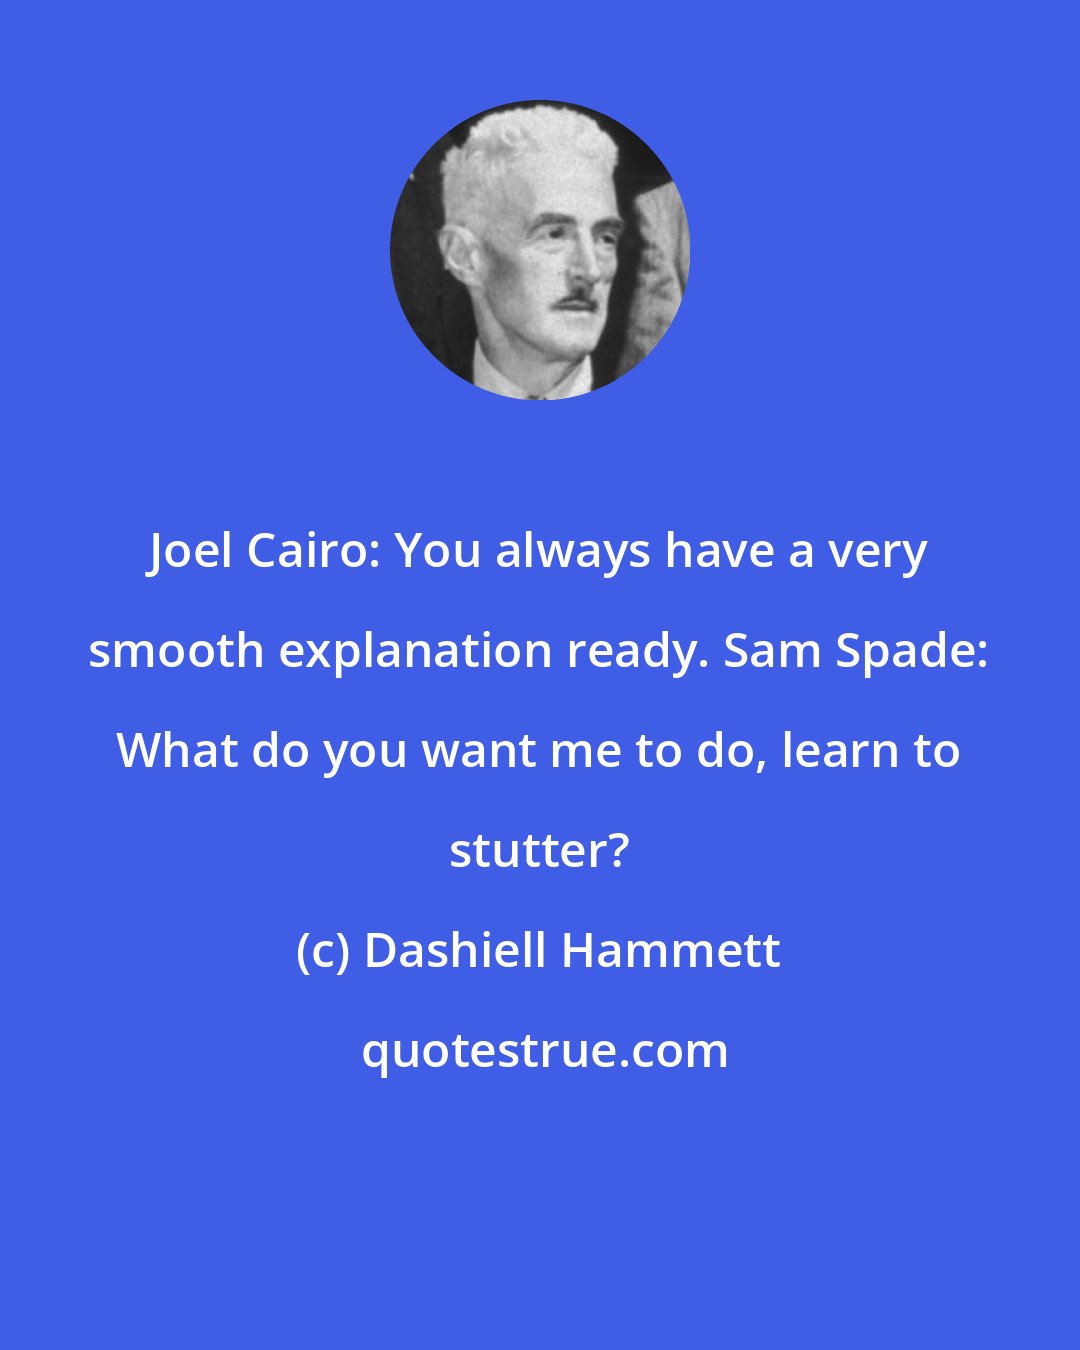 Dashiell Hammett: Joel Cairo: You always have a very smooth explanation ready. Sam Spade: What do you want me to do, learn to stutter?